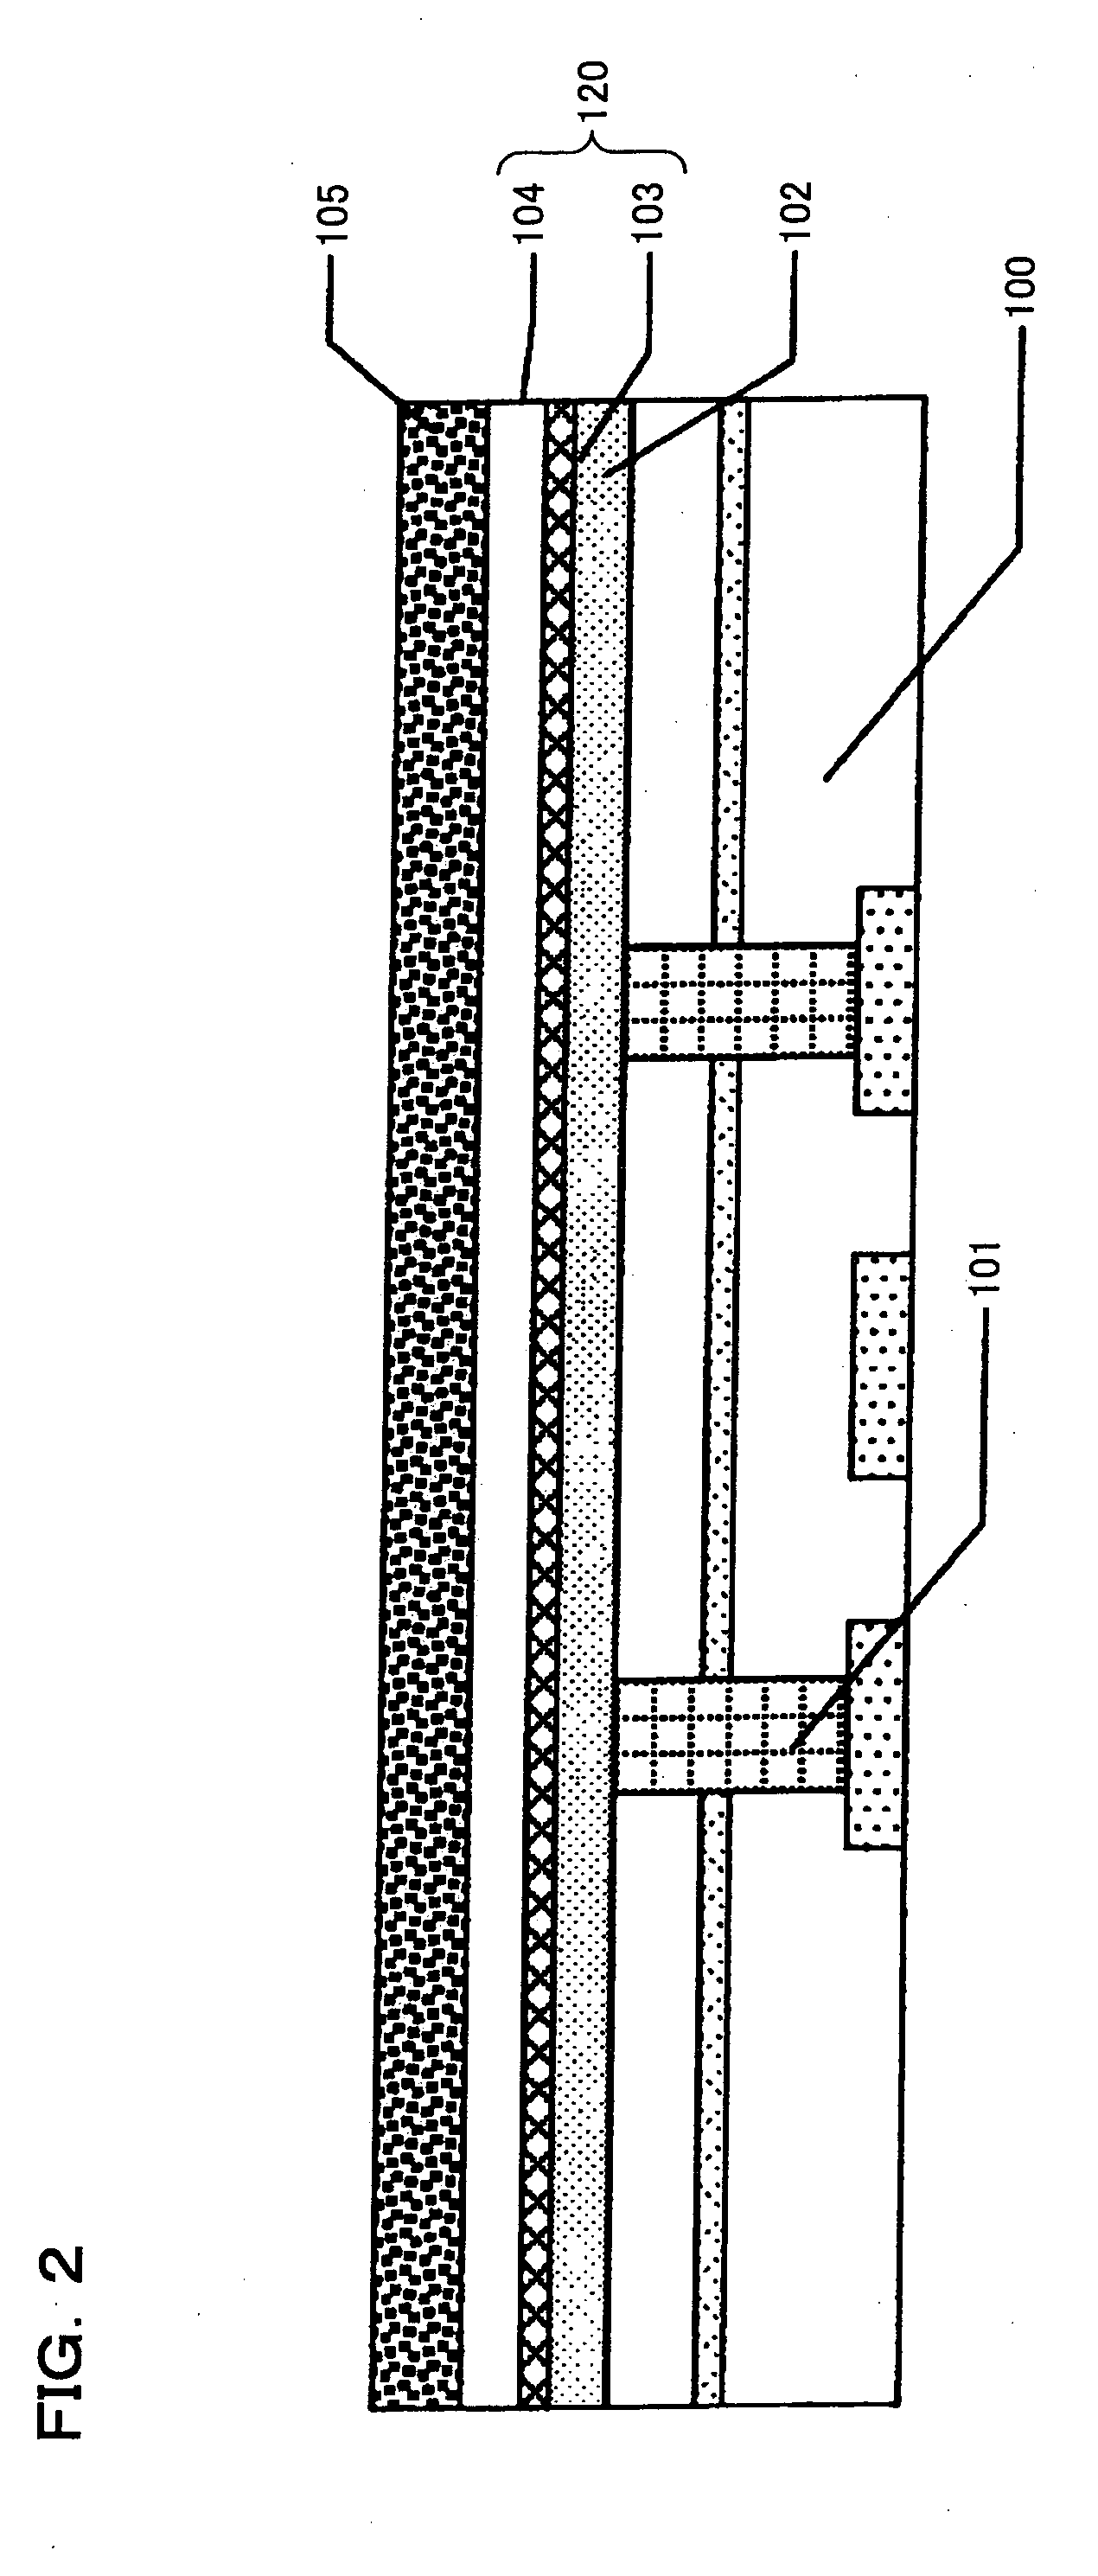 Ferroelectric memory device and method of manufacturing the same